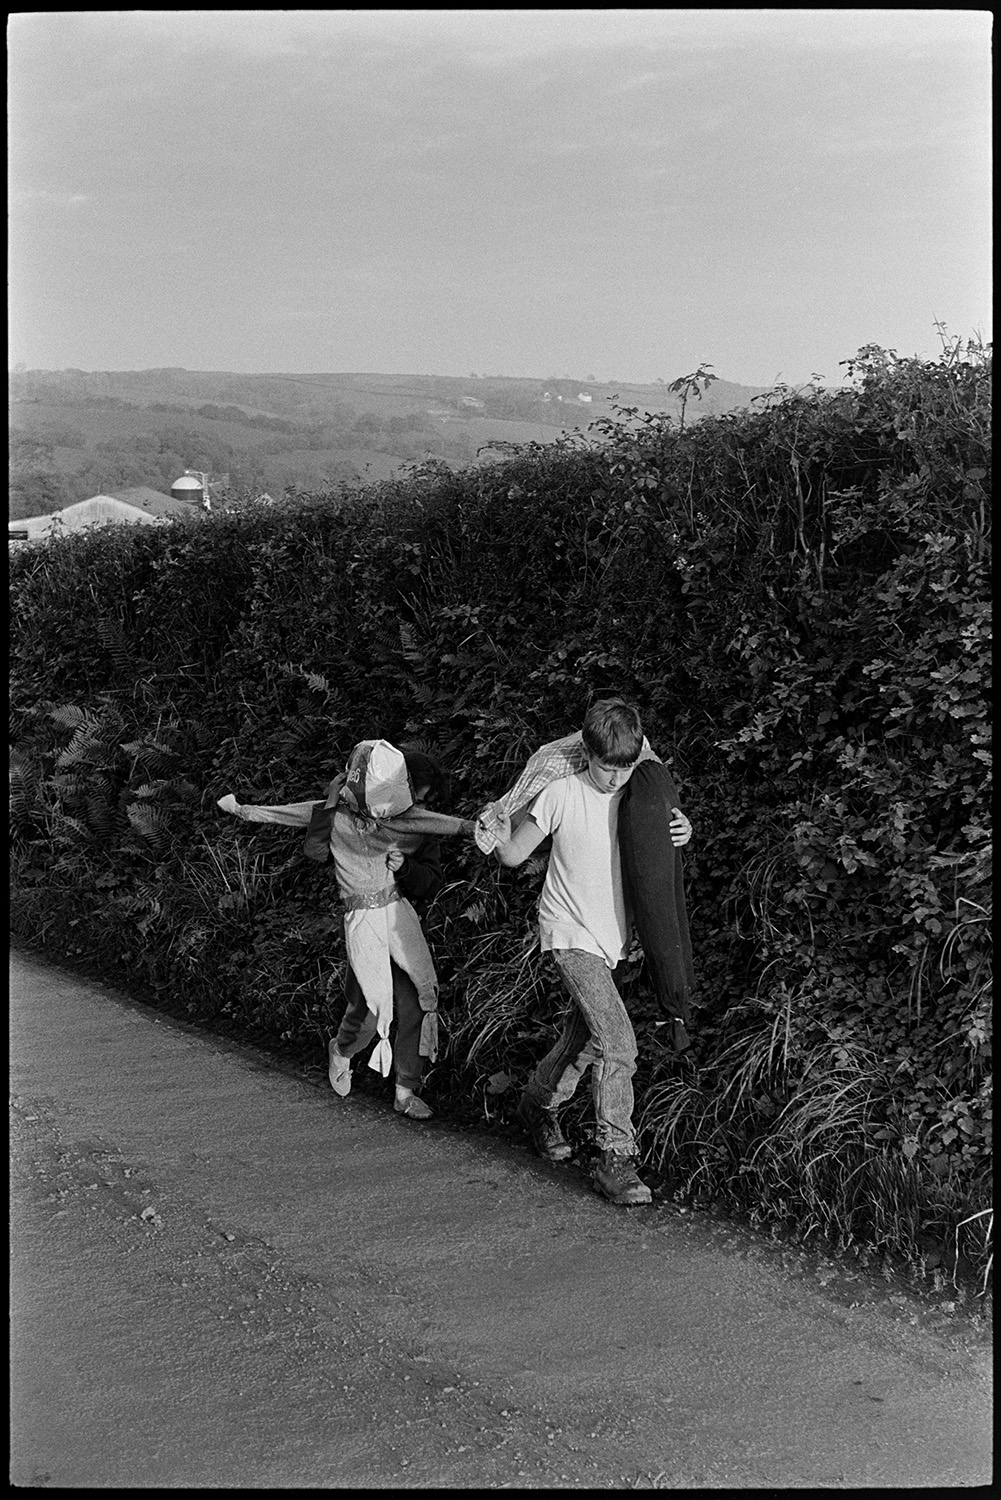 Children walking down lane carrying guy. 
[Two children walking down a lane near Spittle farm, Chulmleigh, each carrying an effigy of Guy Fawkes for bonfire night.]